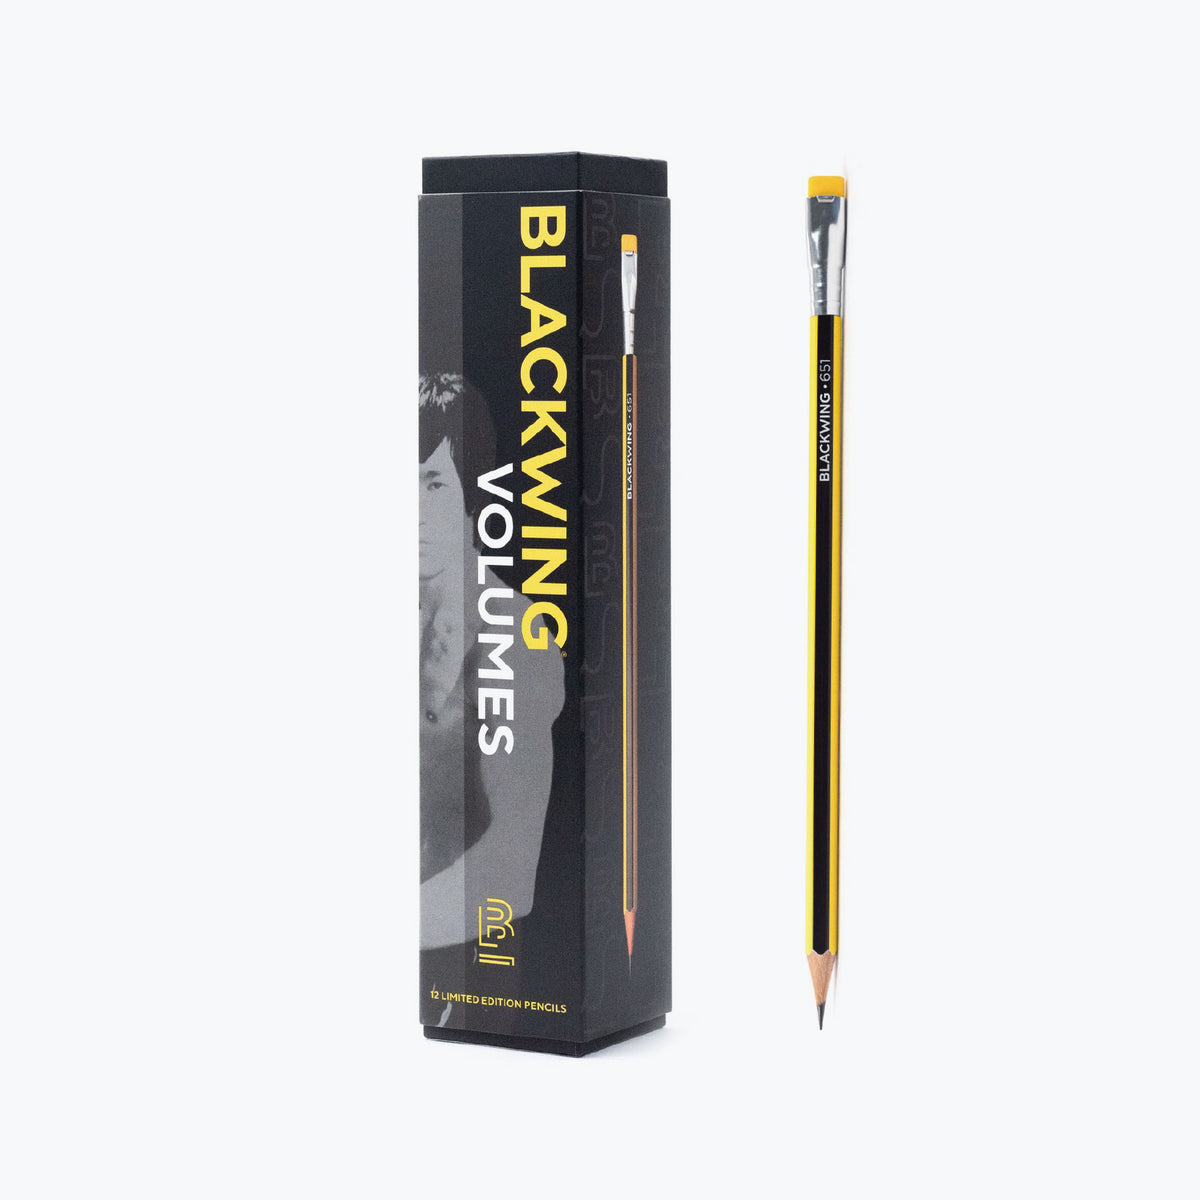 Palomino Blackwing - Pencil - Volume 651 - Box of 12 (Limited Edition)